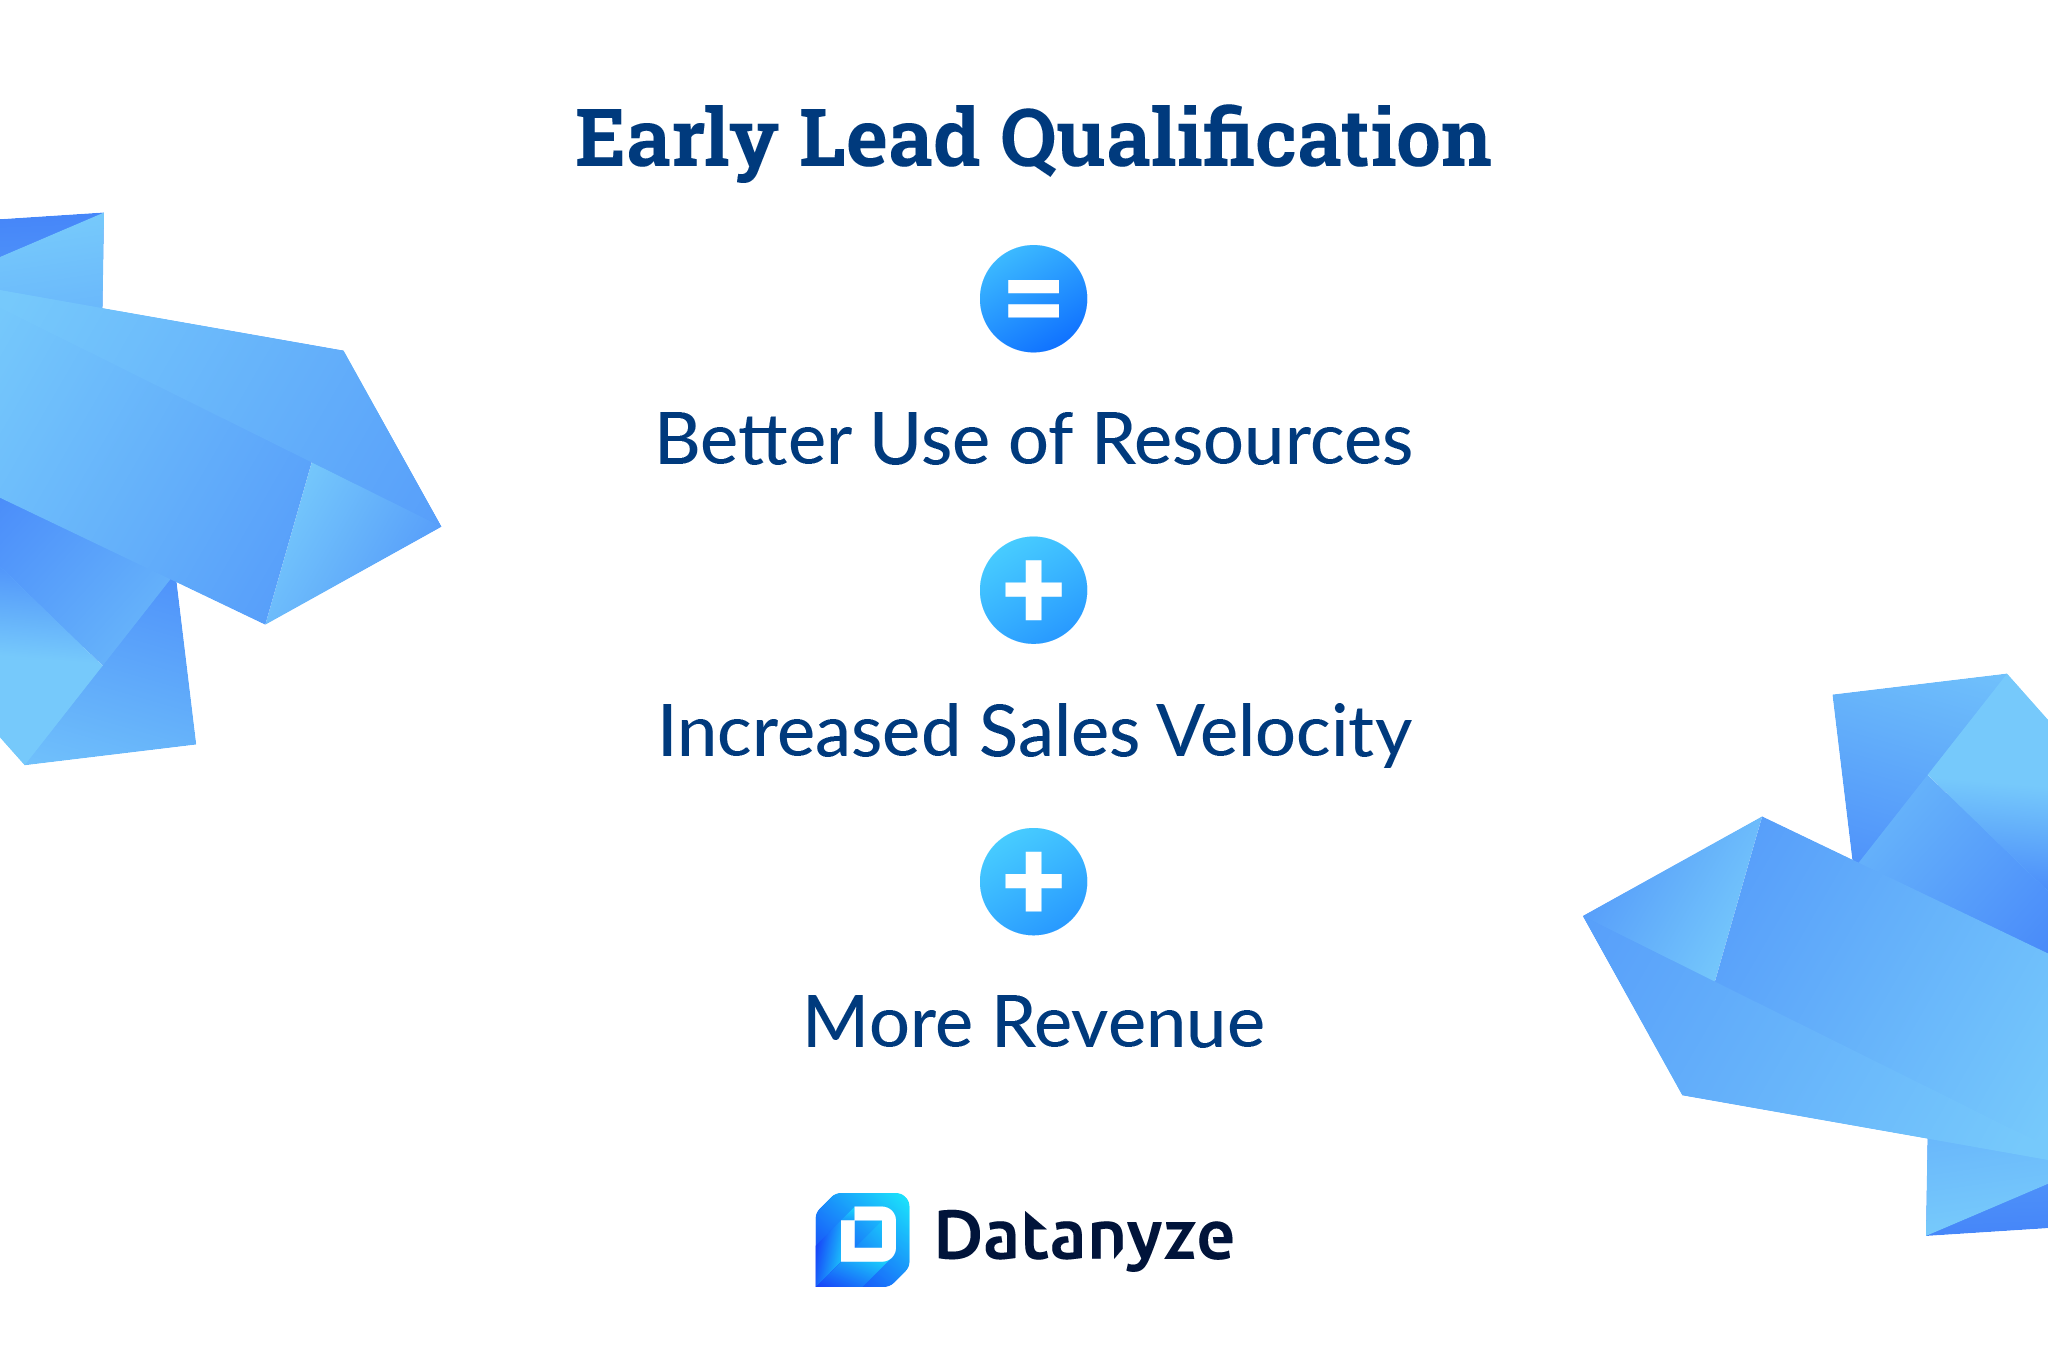 Early Lead Qualification Is the Key to Unlocking More Sales Revenue